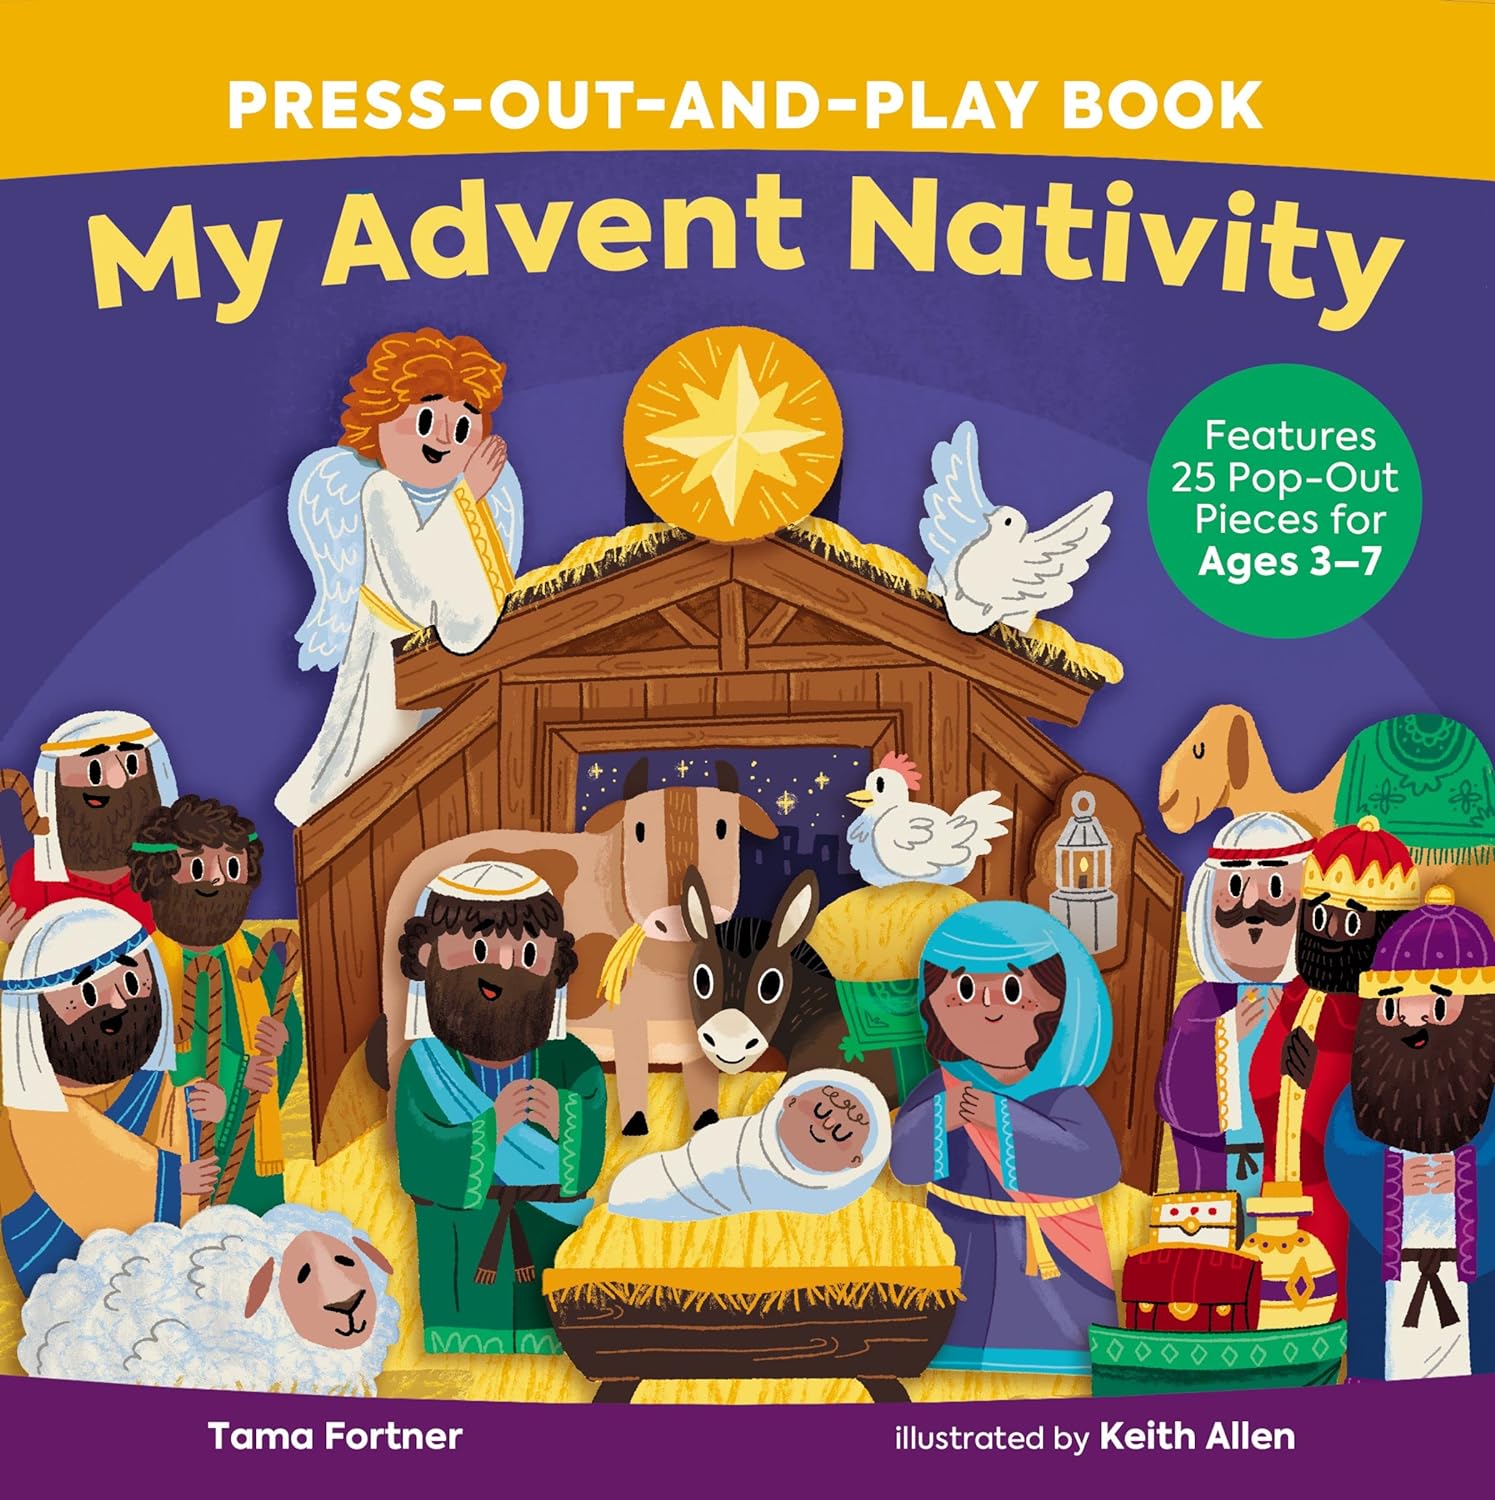 My Advent Nativity Press-Out and Play Book